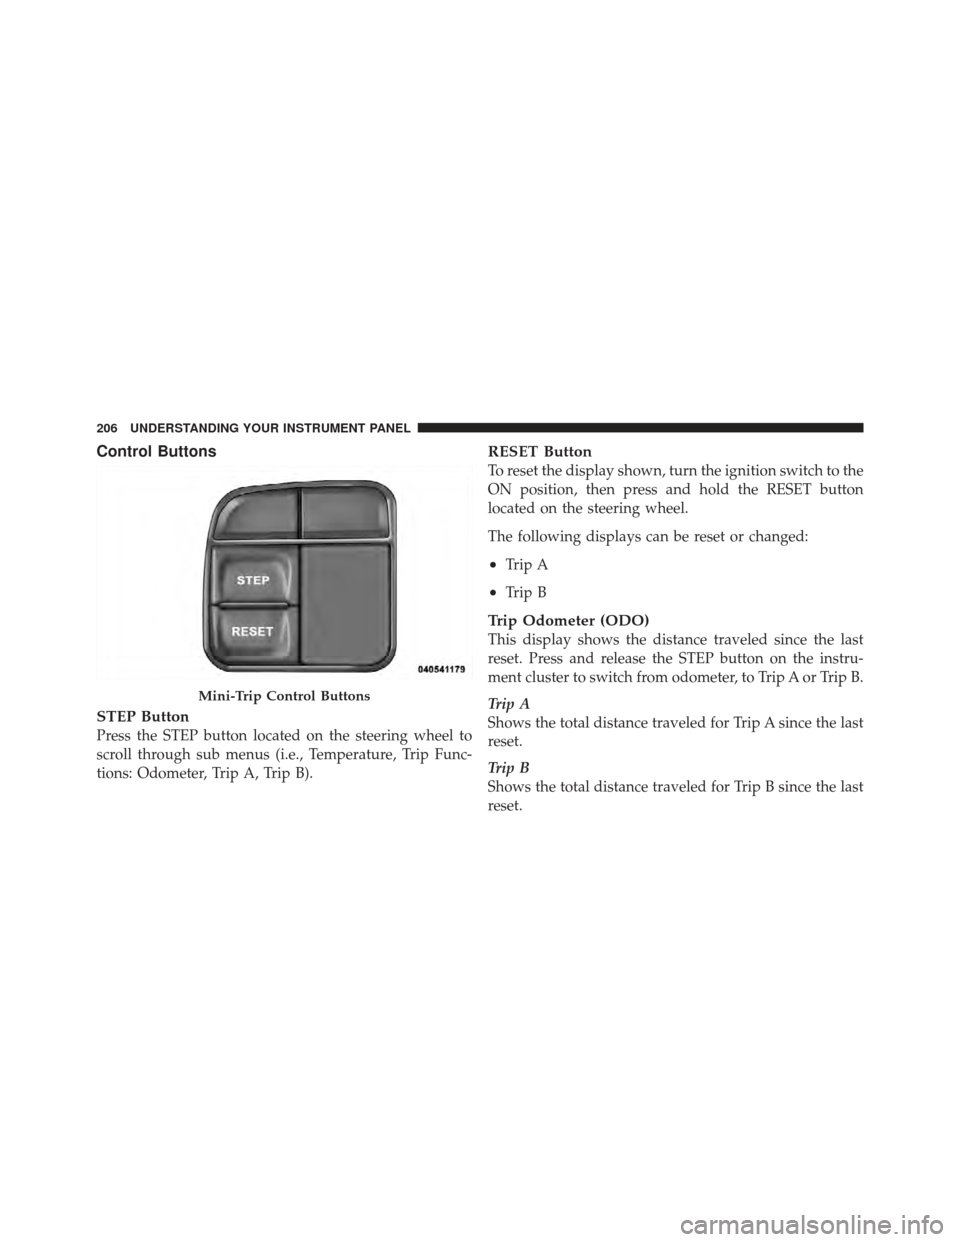 JEEP COMPASS 2011 1.G Owners Manual Control Buttons
STEP Button
Press the STEP button located on the steering wheel to
scroll through sub menus (i.e., Temperature, Trip Func-
tions: Odometer, Trip A, Trip B).
RESET Button
To reset the d